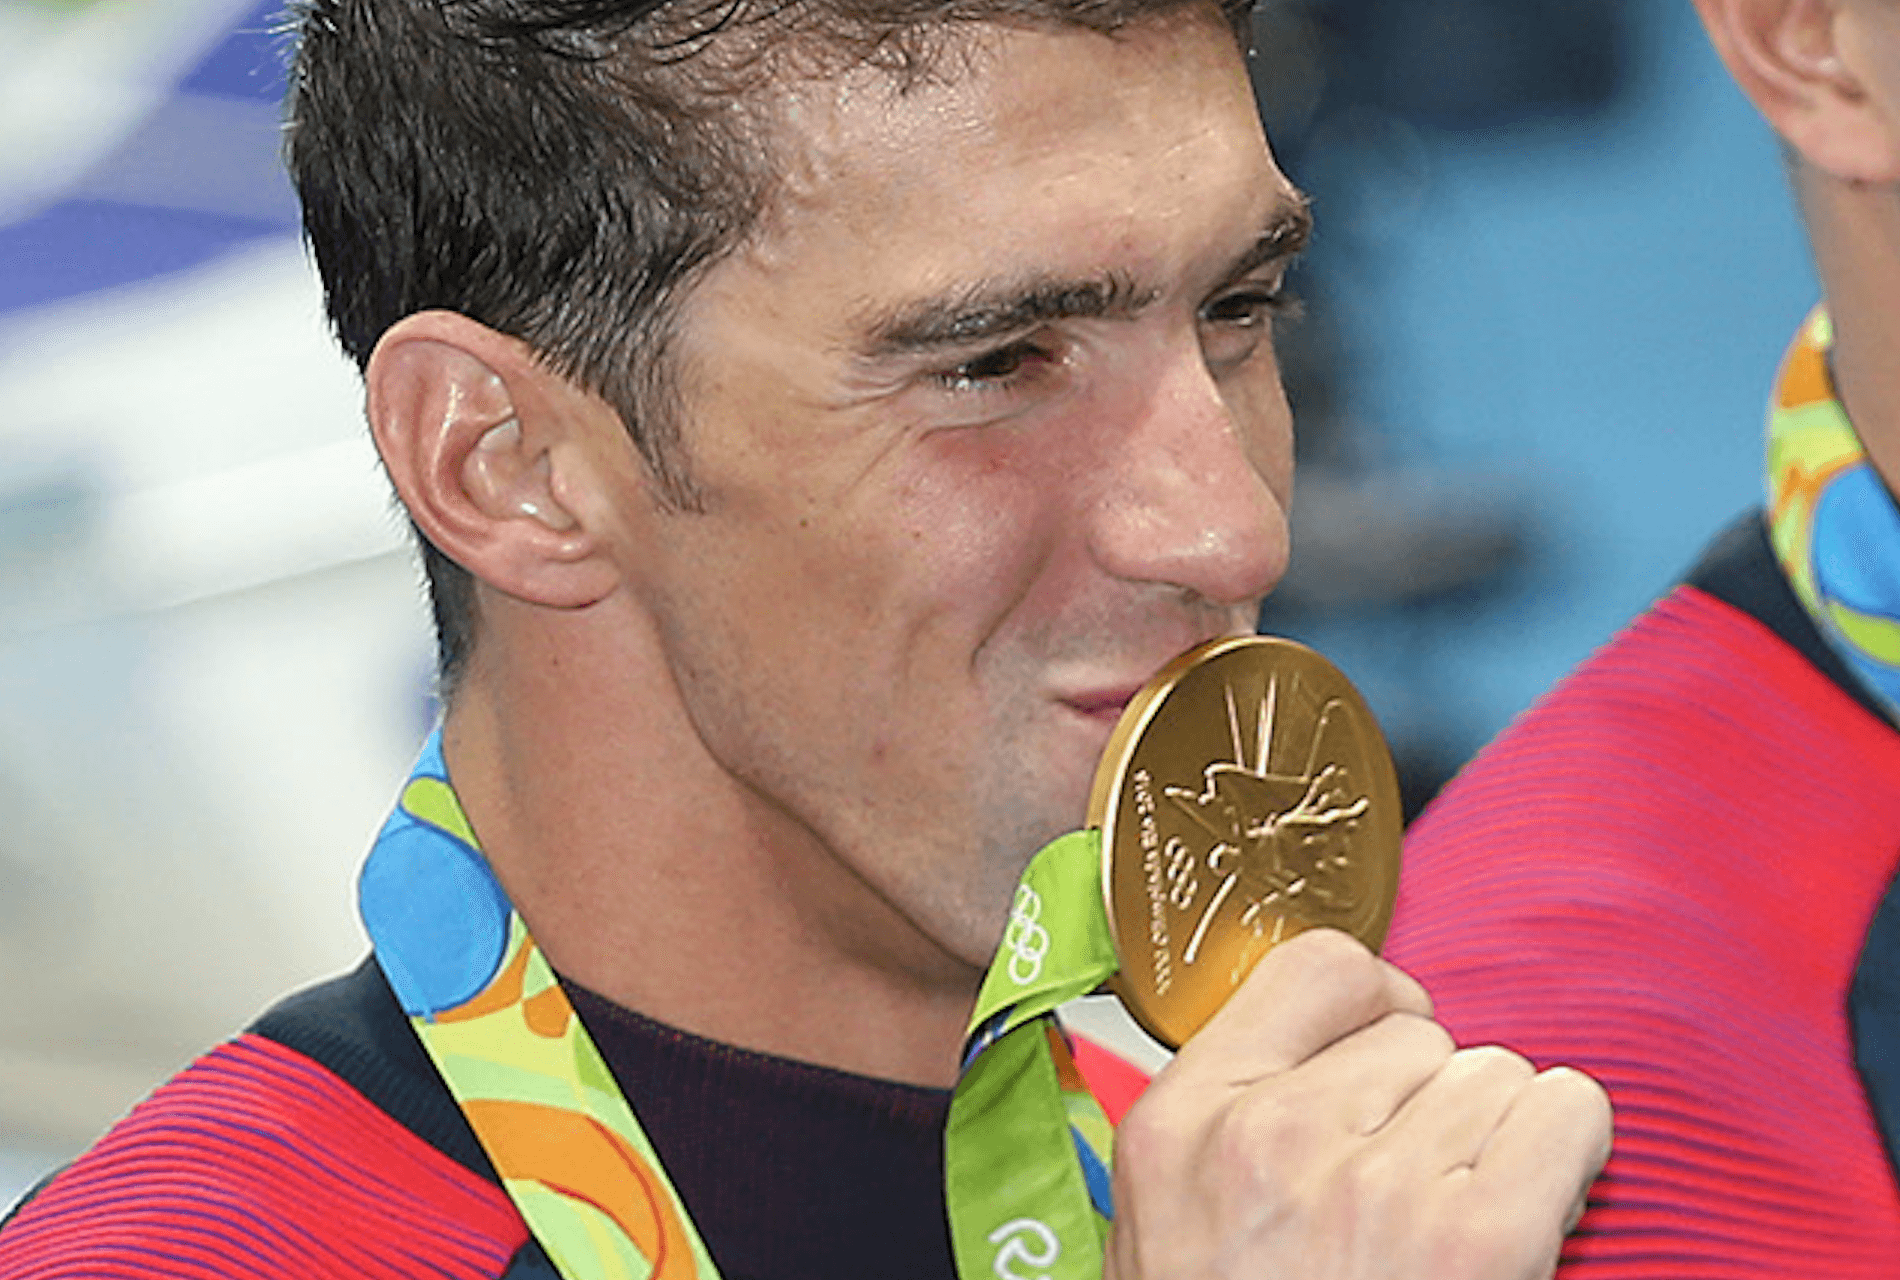 Michael Phelps Becomes Oldest to Win Individual Gold Swimming Medal